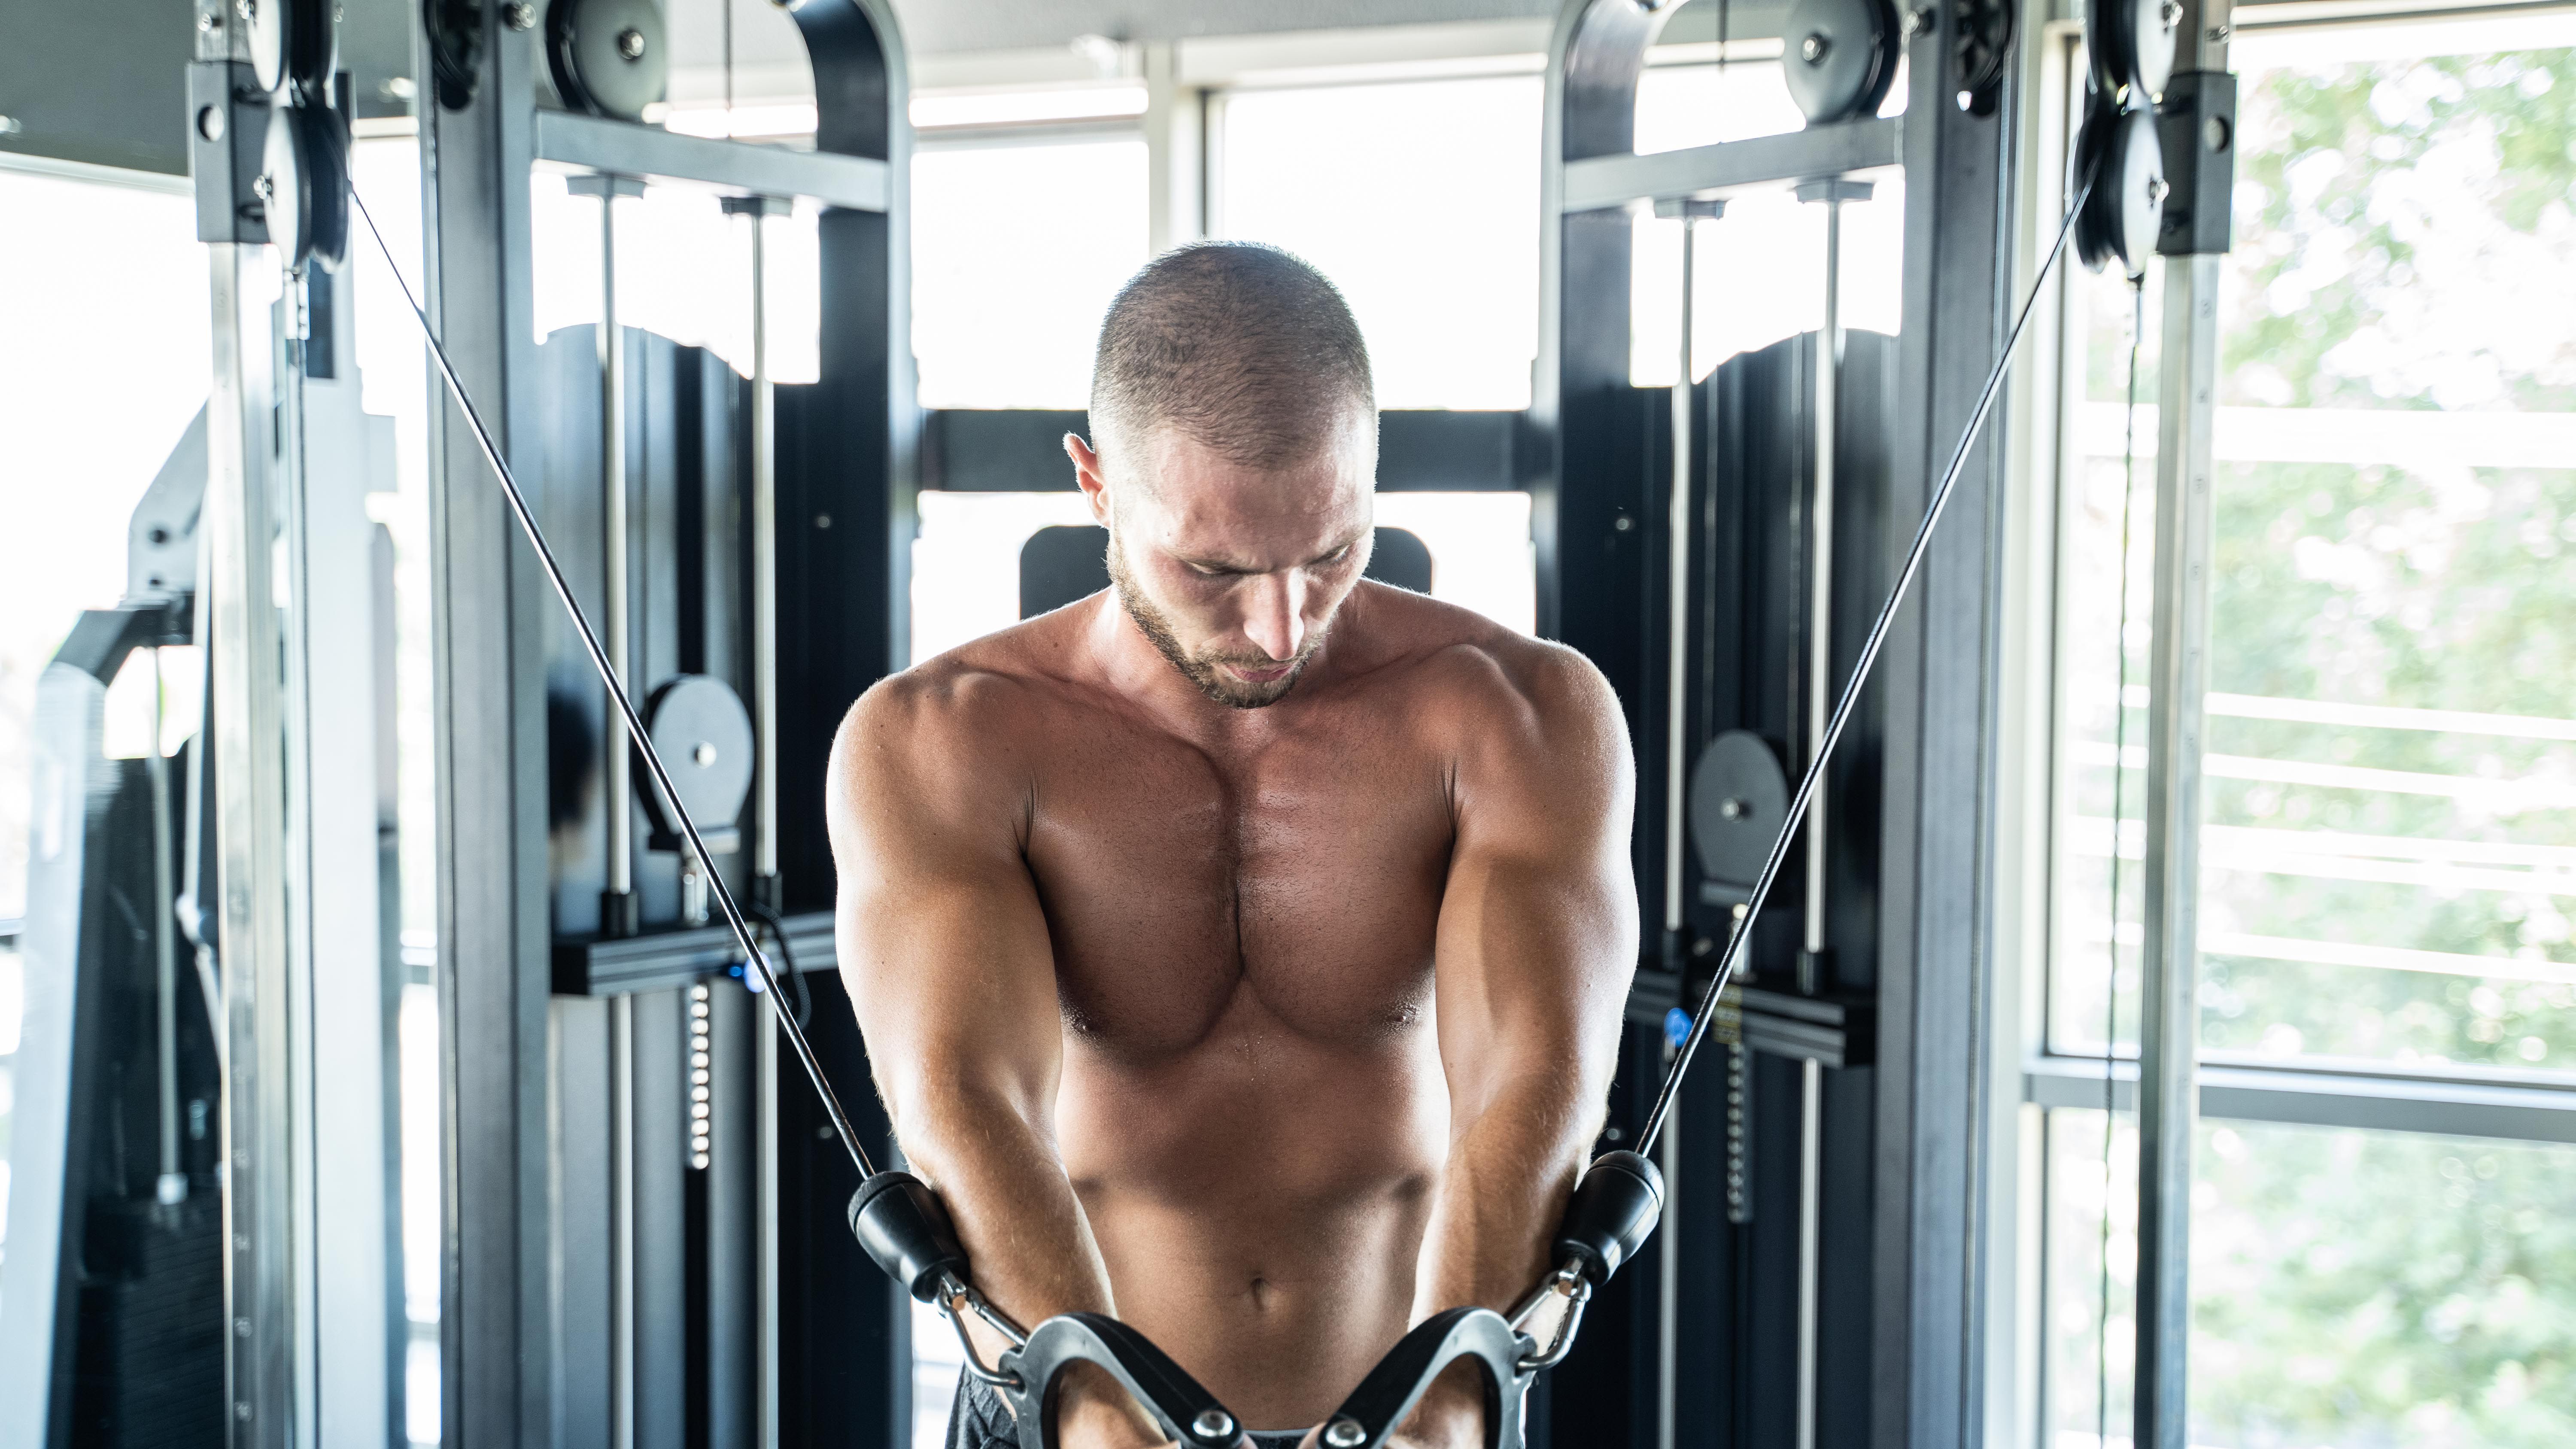 https://hips.hearstapps.com/hmg-prod/images/muscular-bodybuilder-handsome-men-doing-cable-fly-royalty-free-image-1654539319.jpg?crop=1xw:0.84375xh;center,top